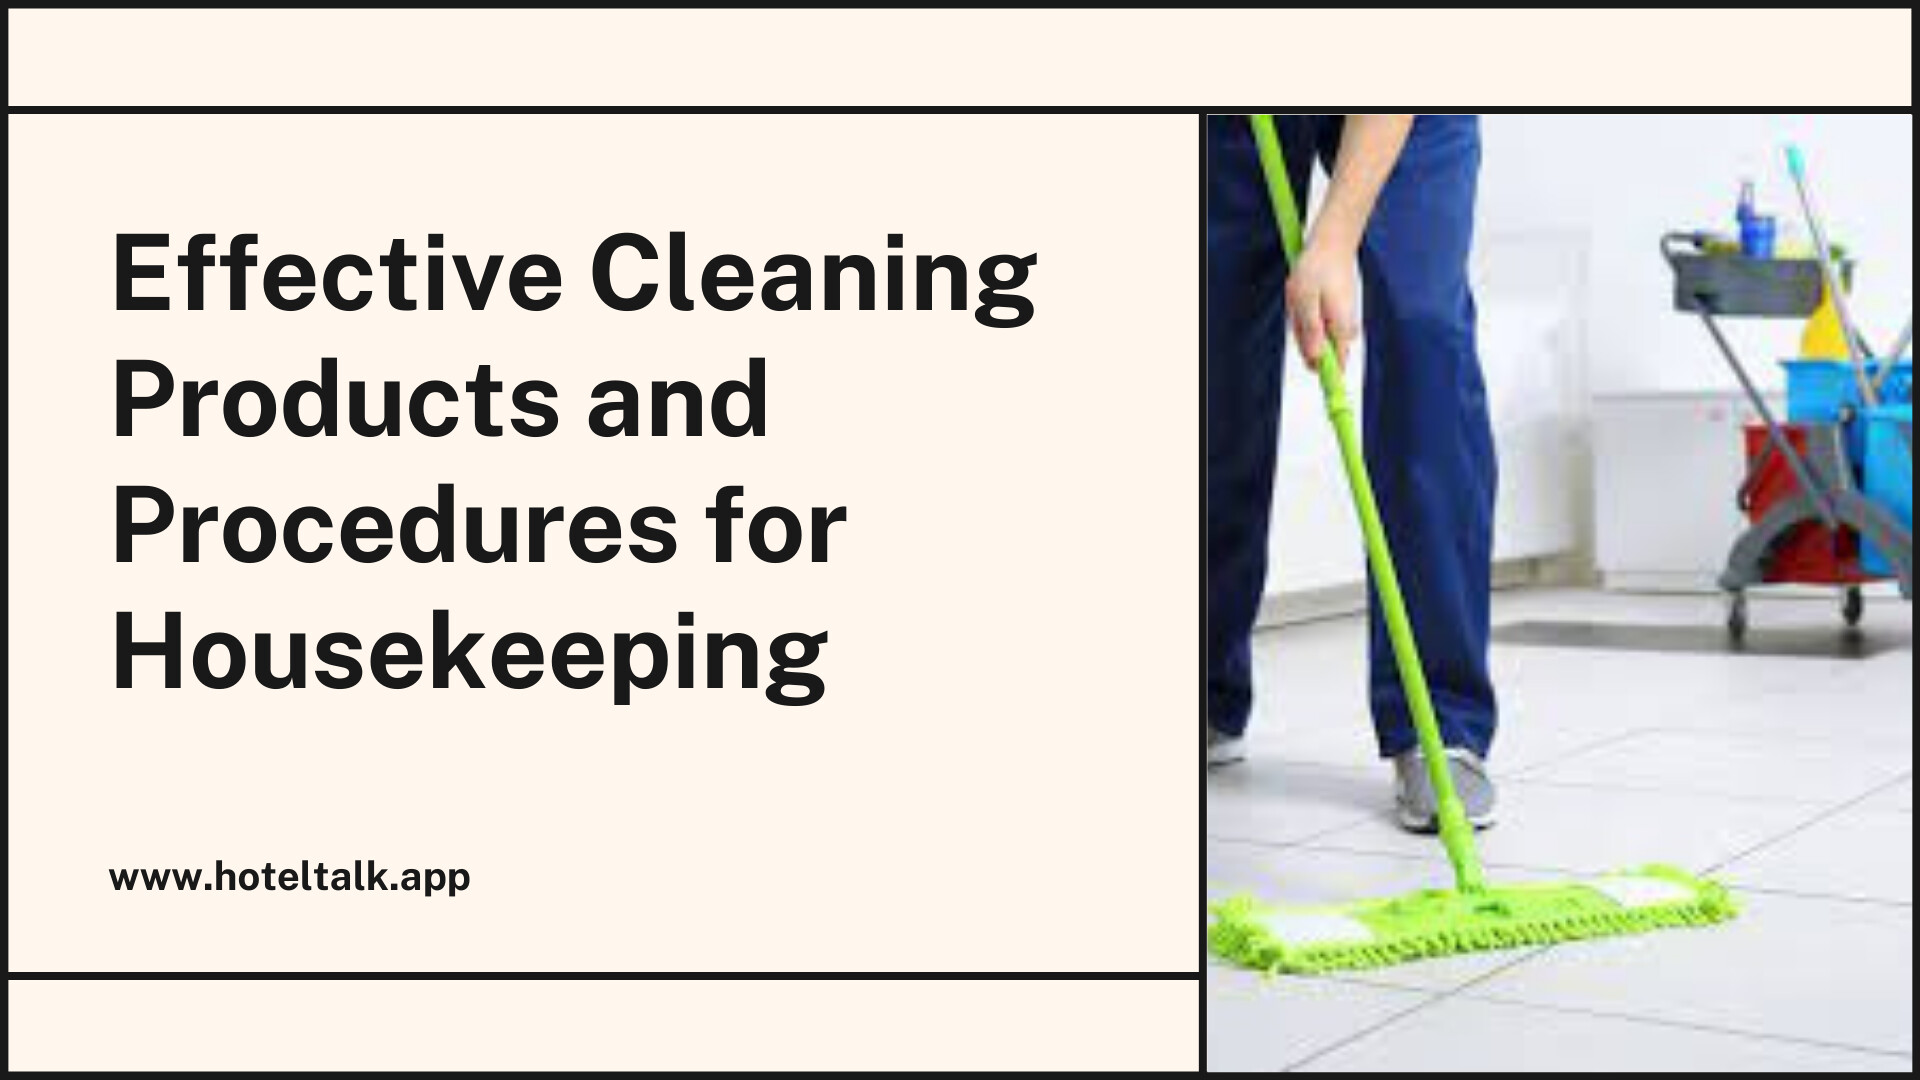 Effective Cleaning Products and Procedures for Housekeeping